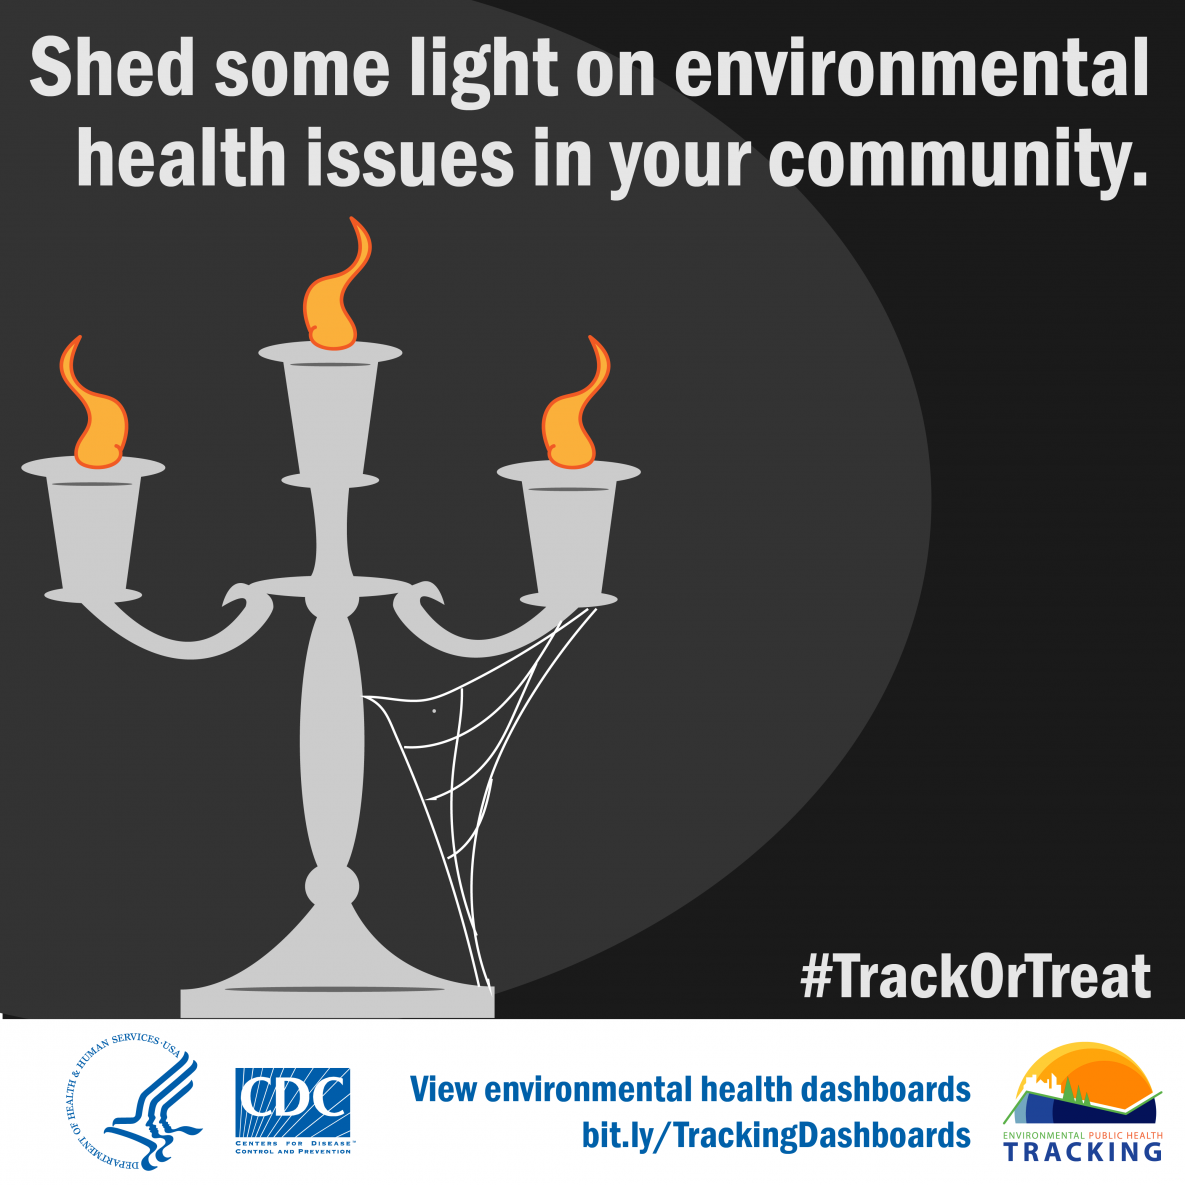 Candelabra with text: "Shed some light on environmental health issues in your community."